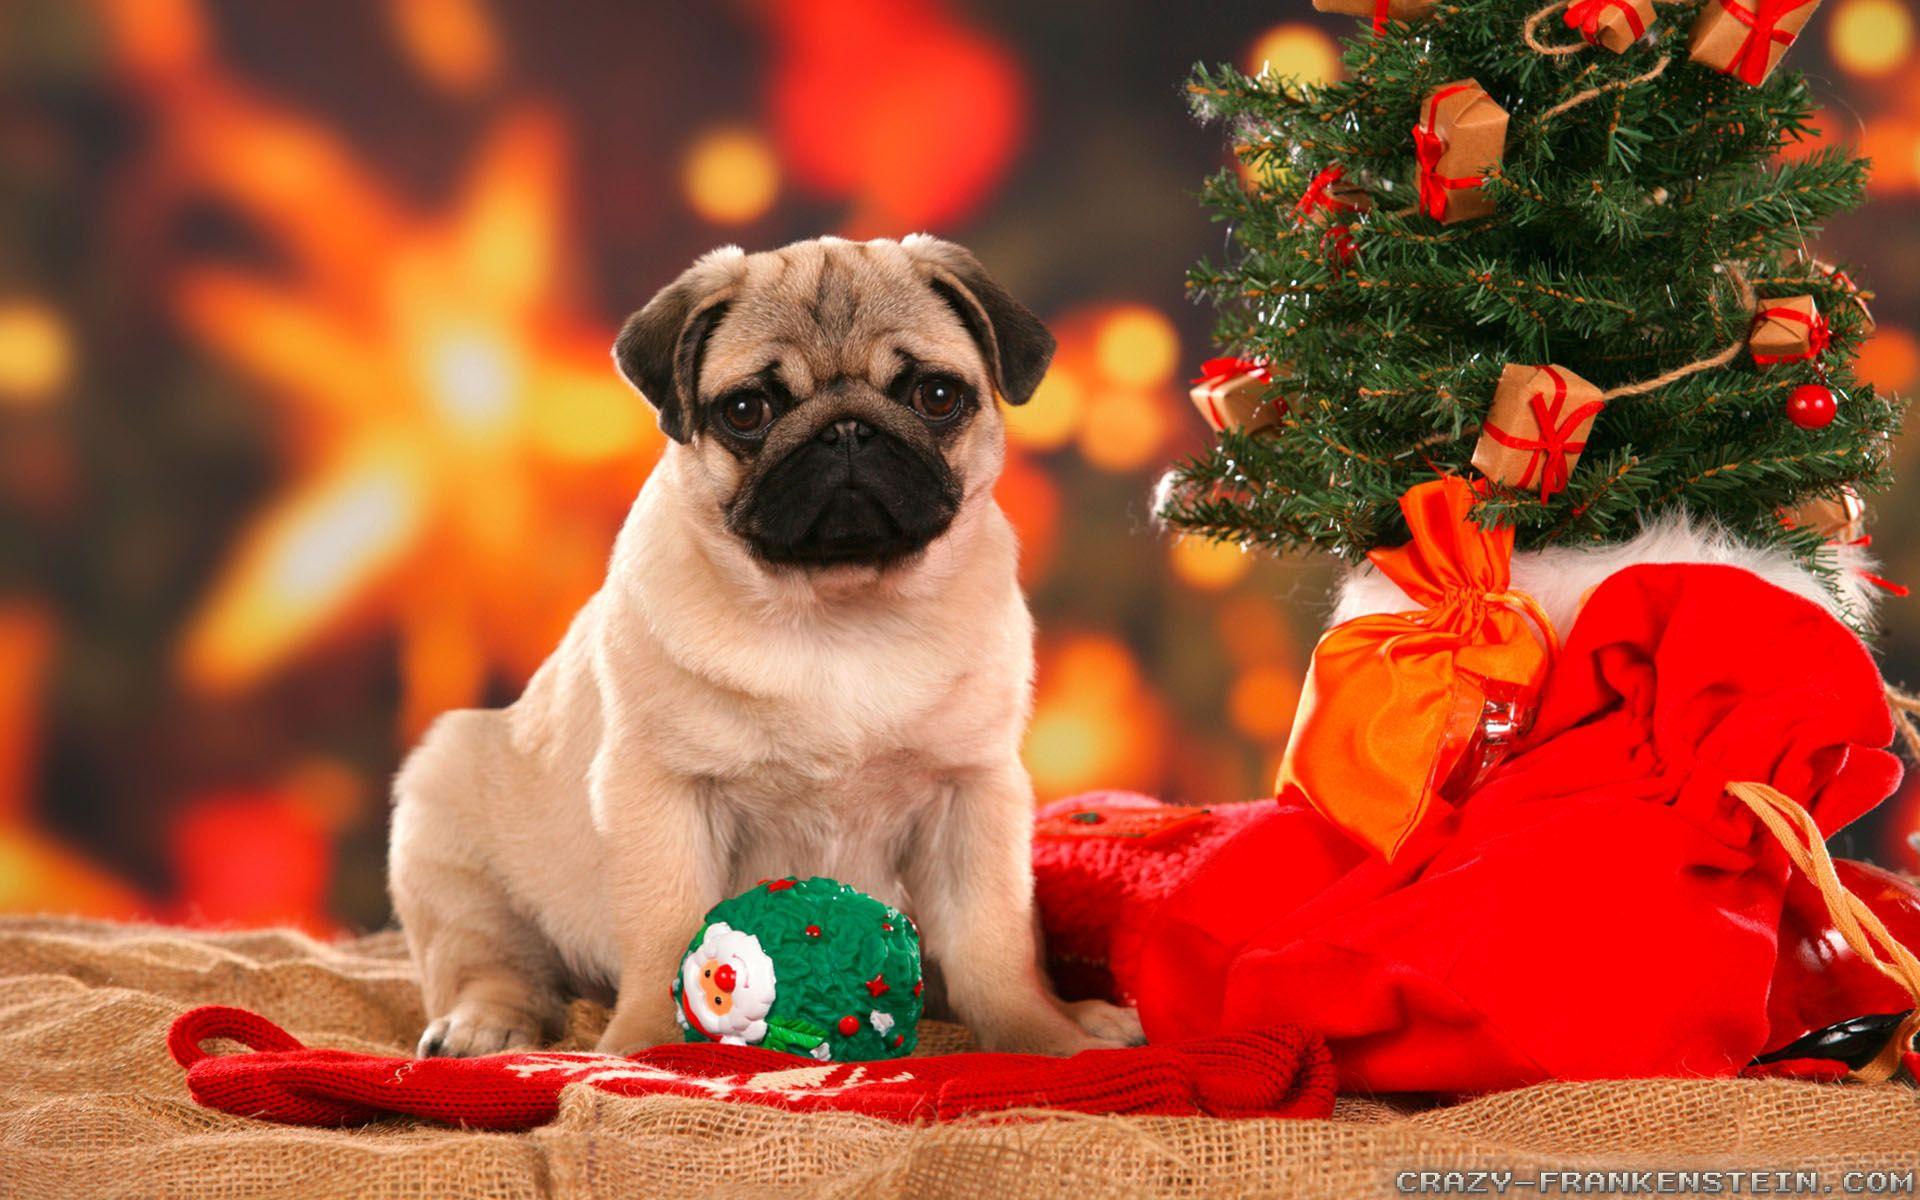 Cute Christmas Dog Wallpapers - Wallpaper Cave